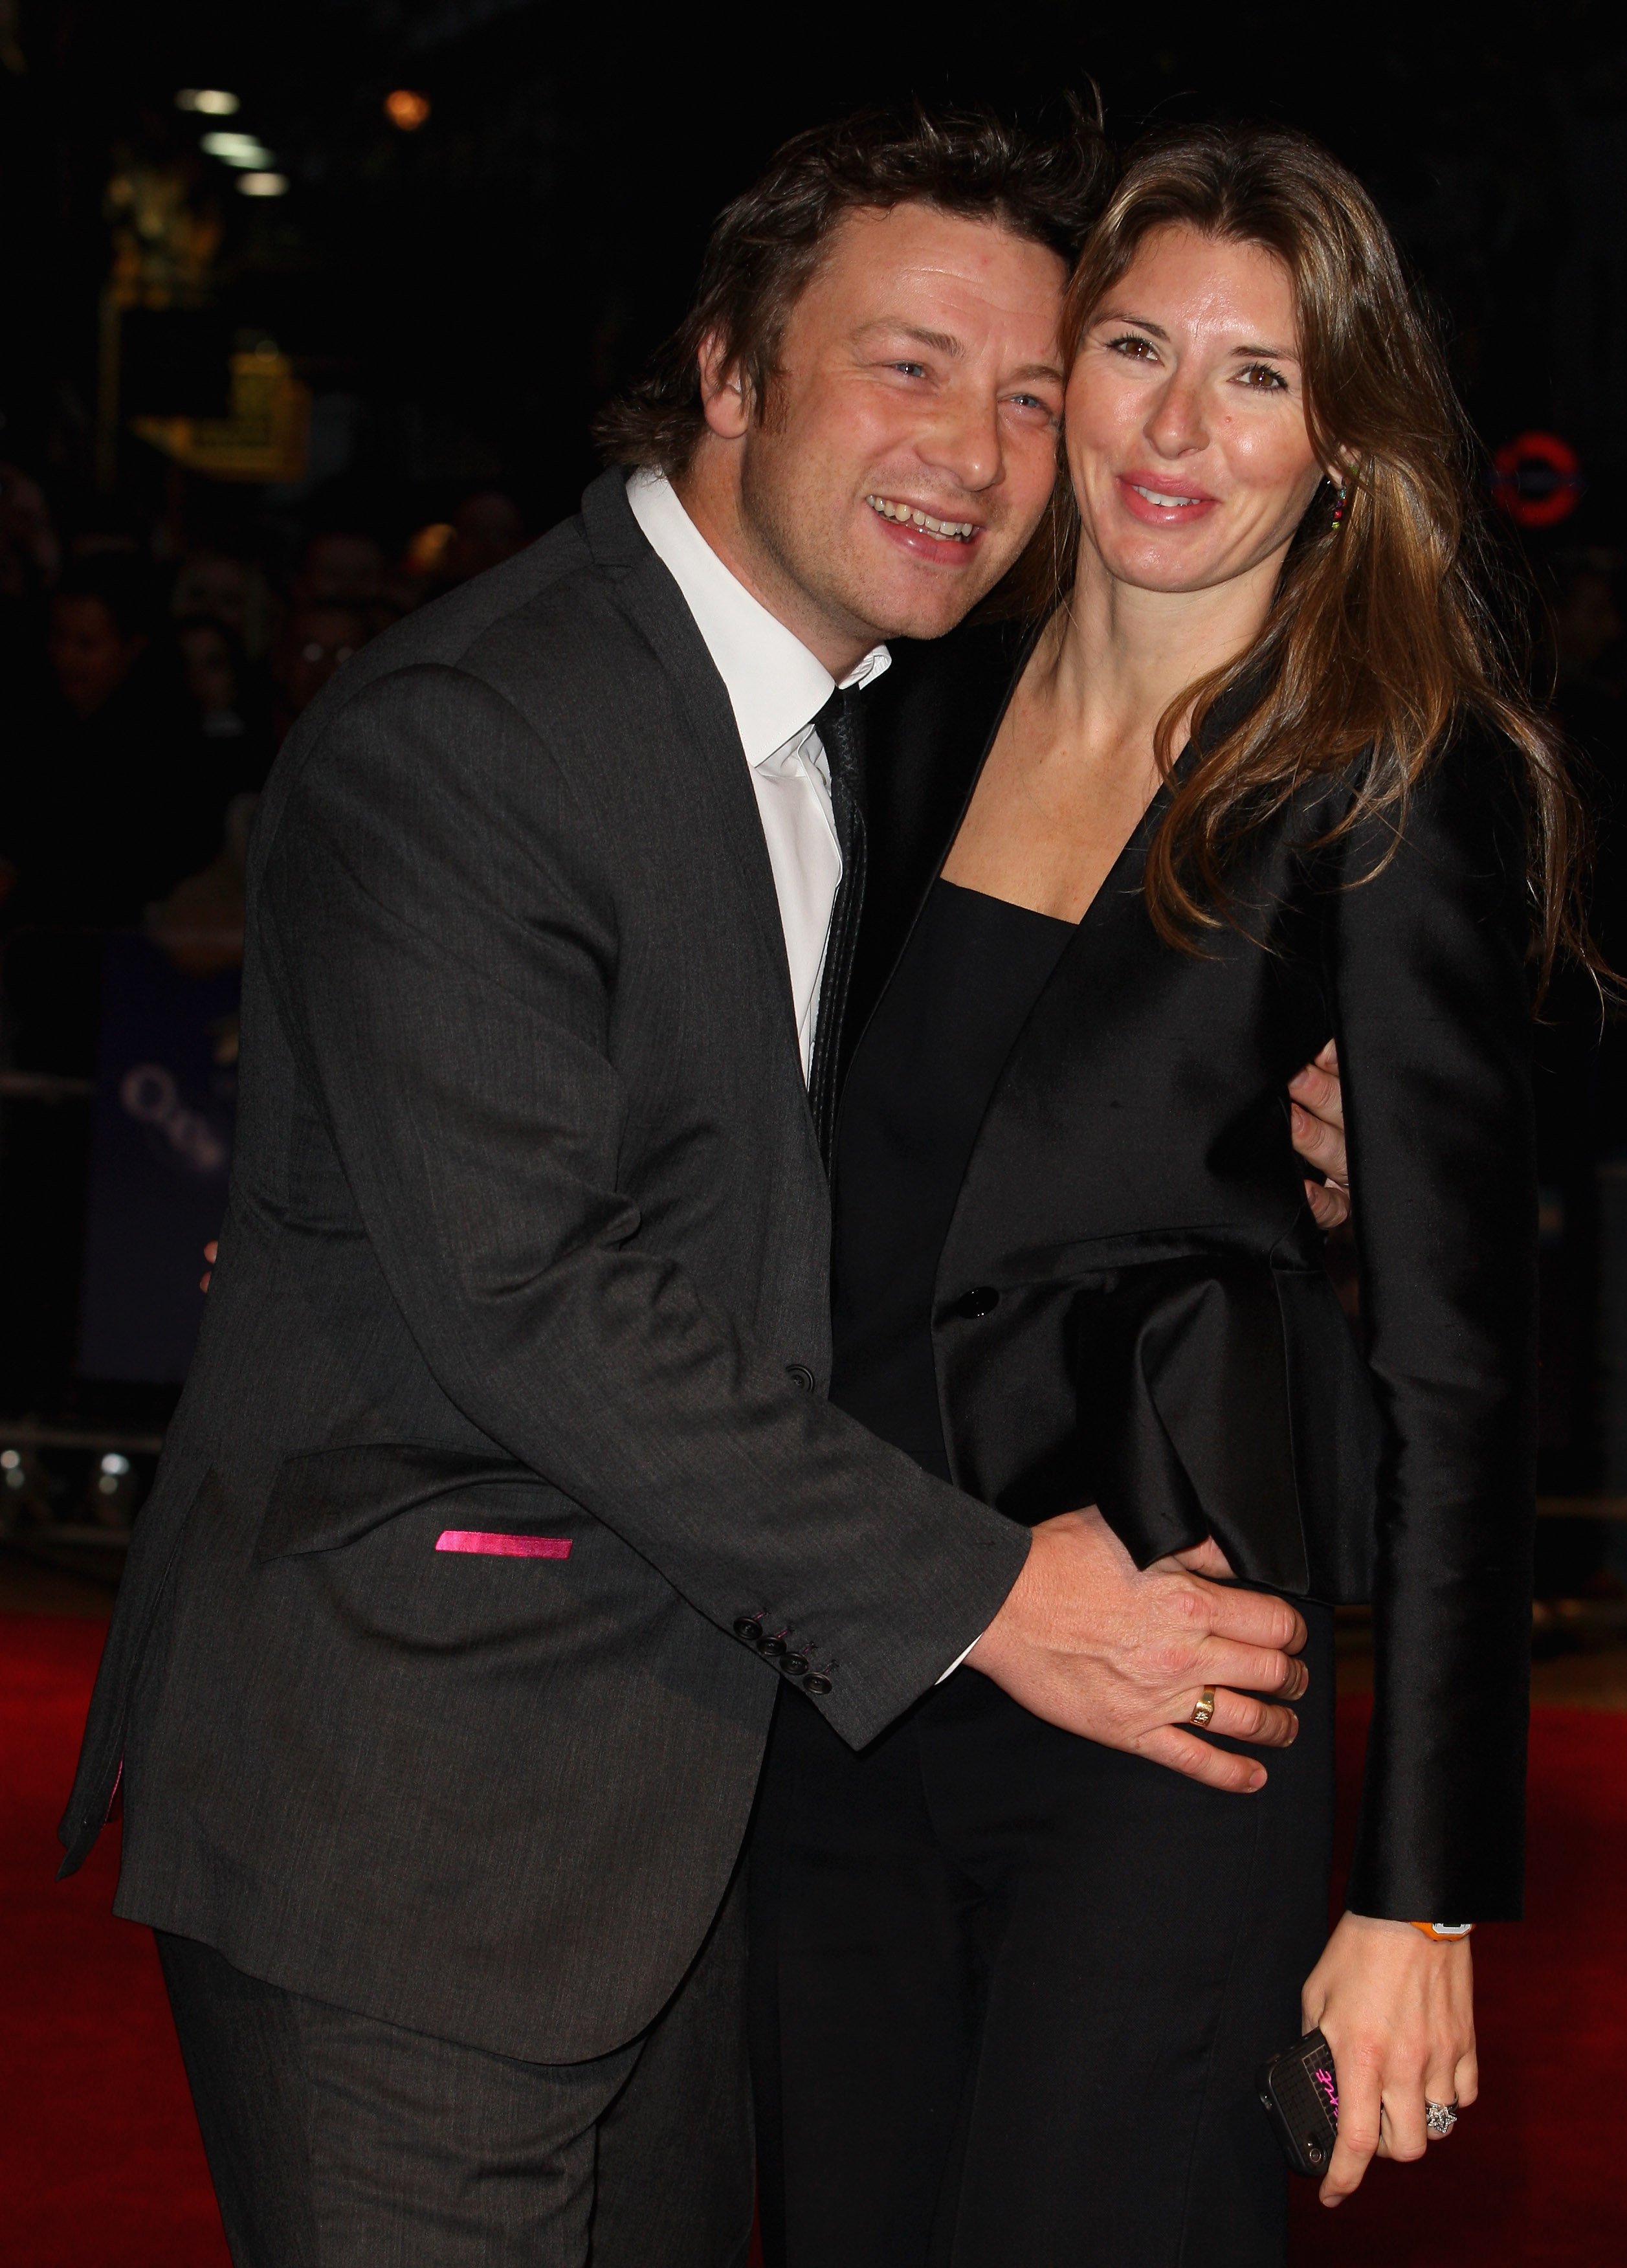 Jamie Oliver and his wife Juliette "Jools" Norton attend the screening of "Take Shelter" at The 55th BFI London Film Festival on October 21, 2011, in London, England. | Source: Getty Images